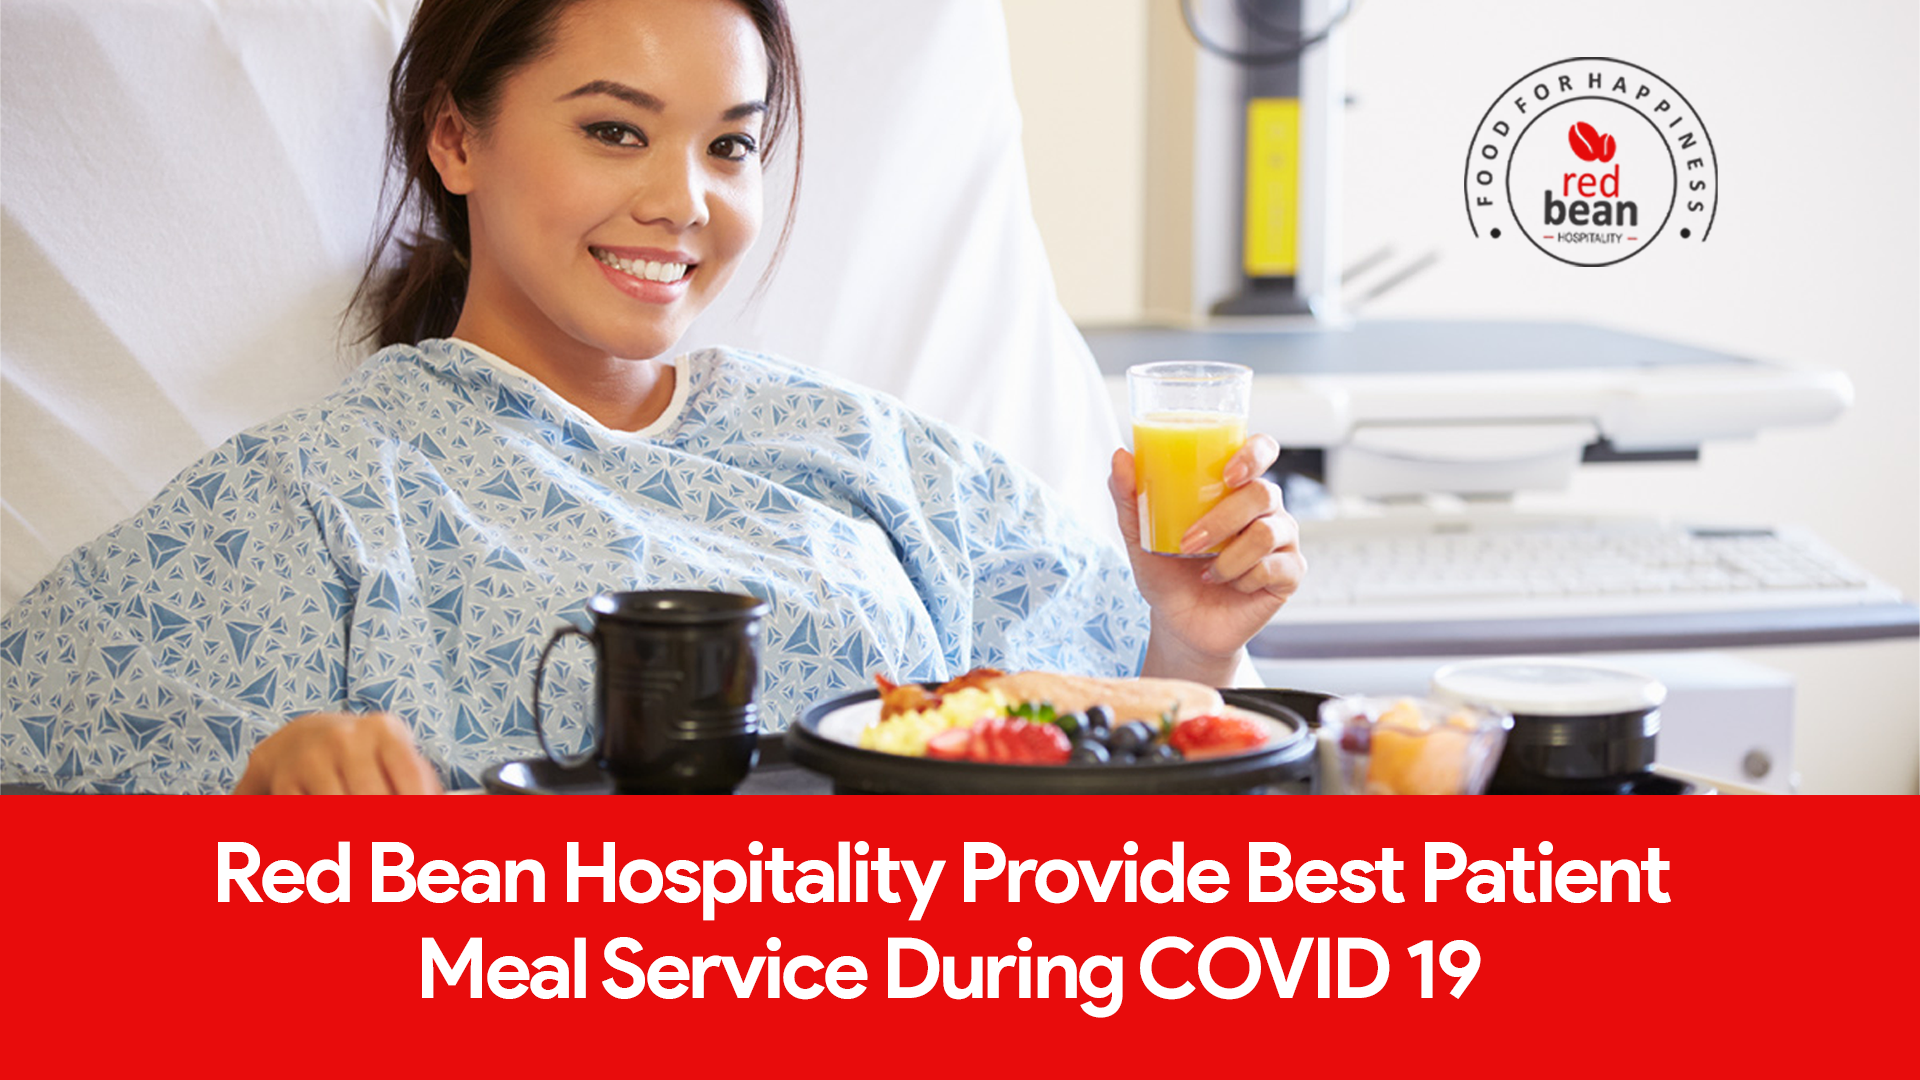 Red Bean Hospitality provide best patient meal service during Covid 19